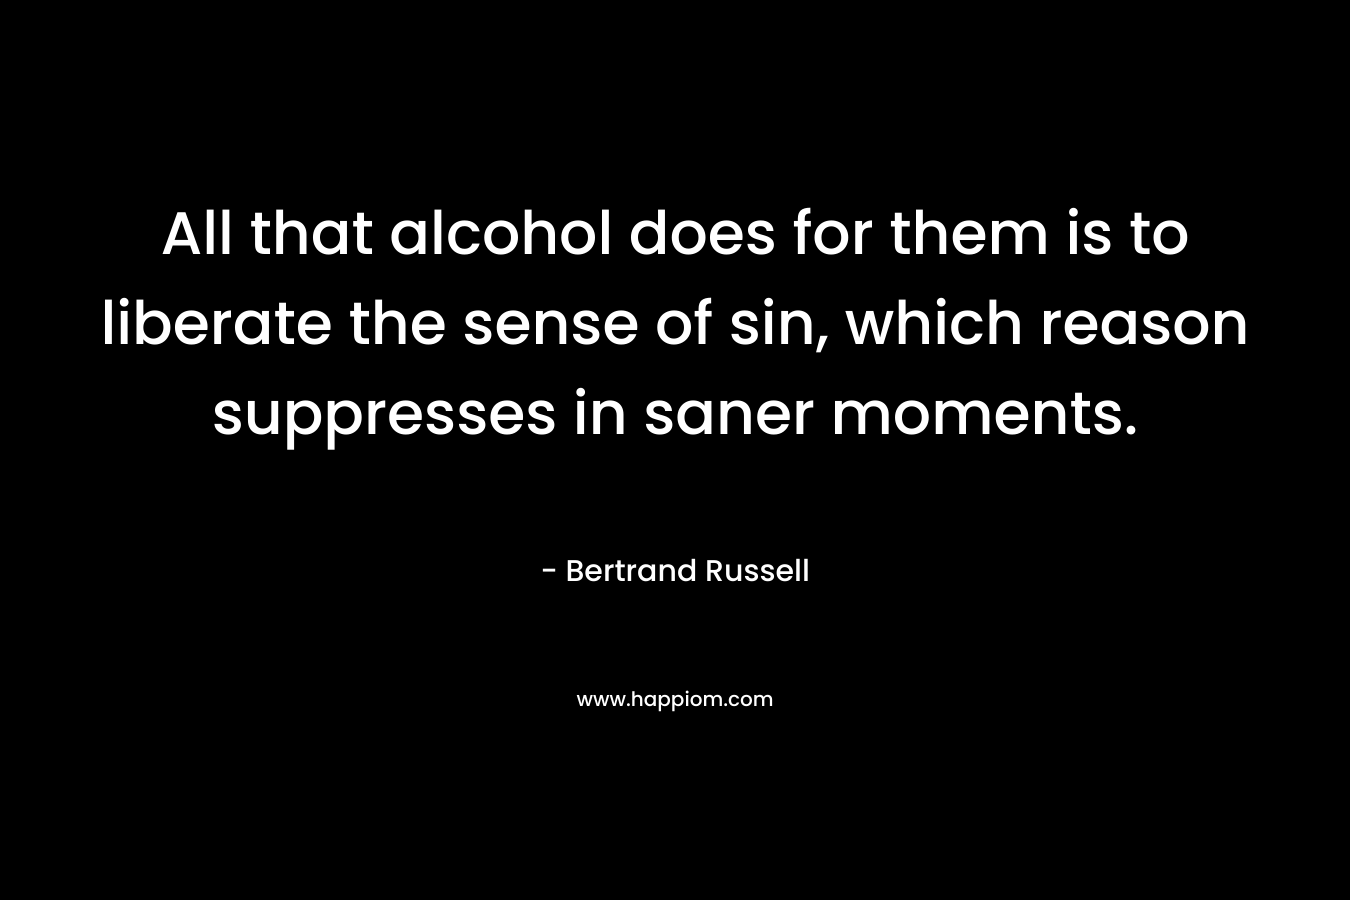 All that alcohol does for them is to liberate the sense of sin, which reason suppresses in saner moments.